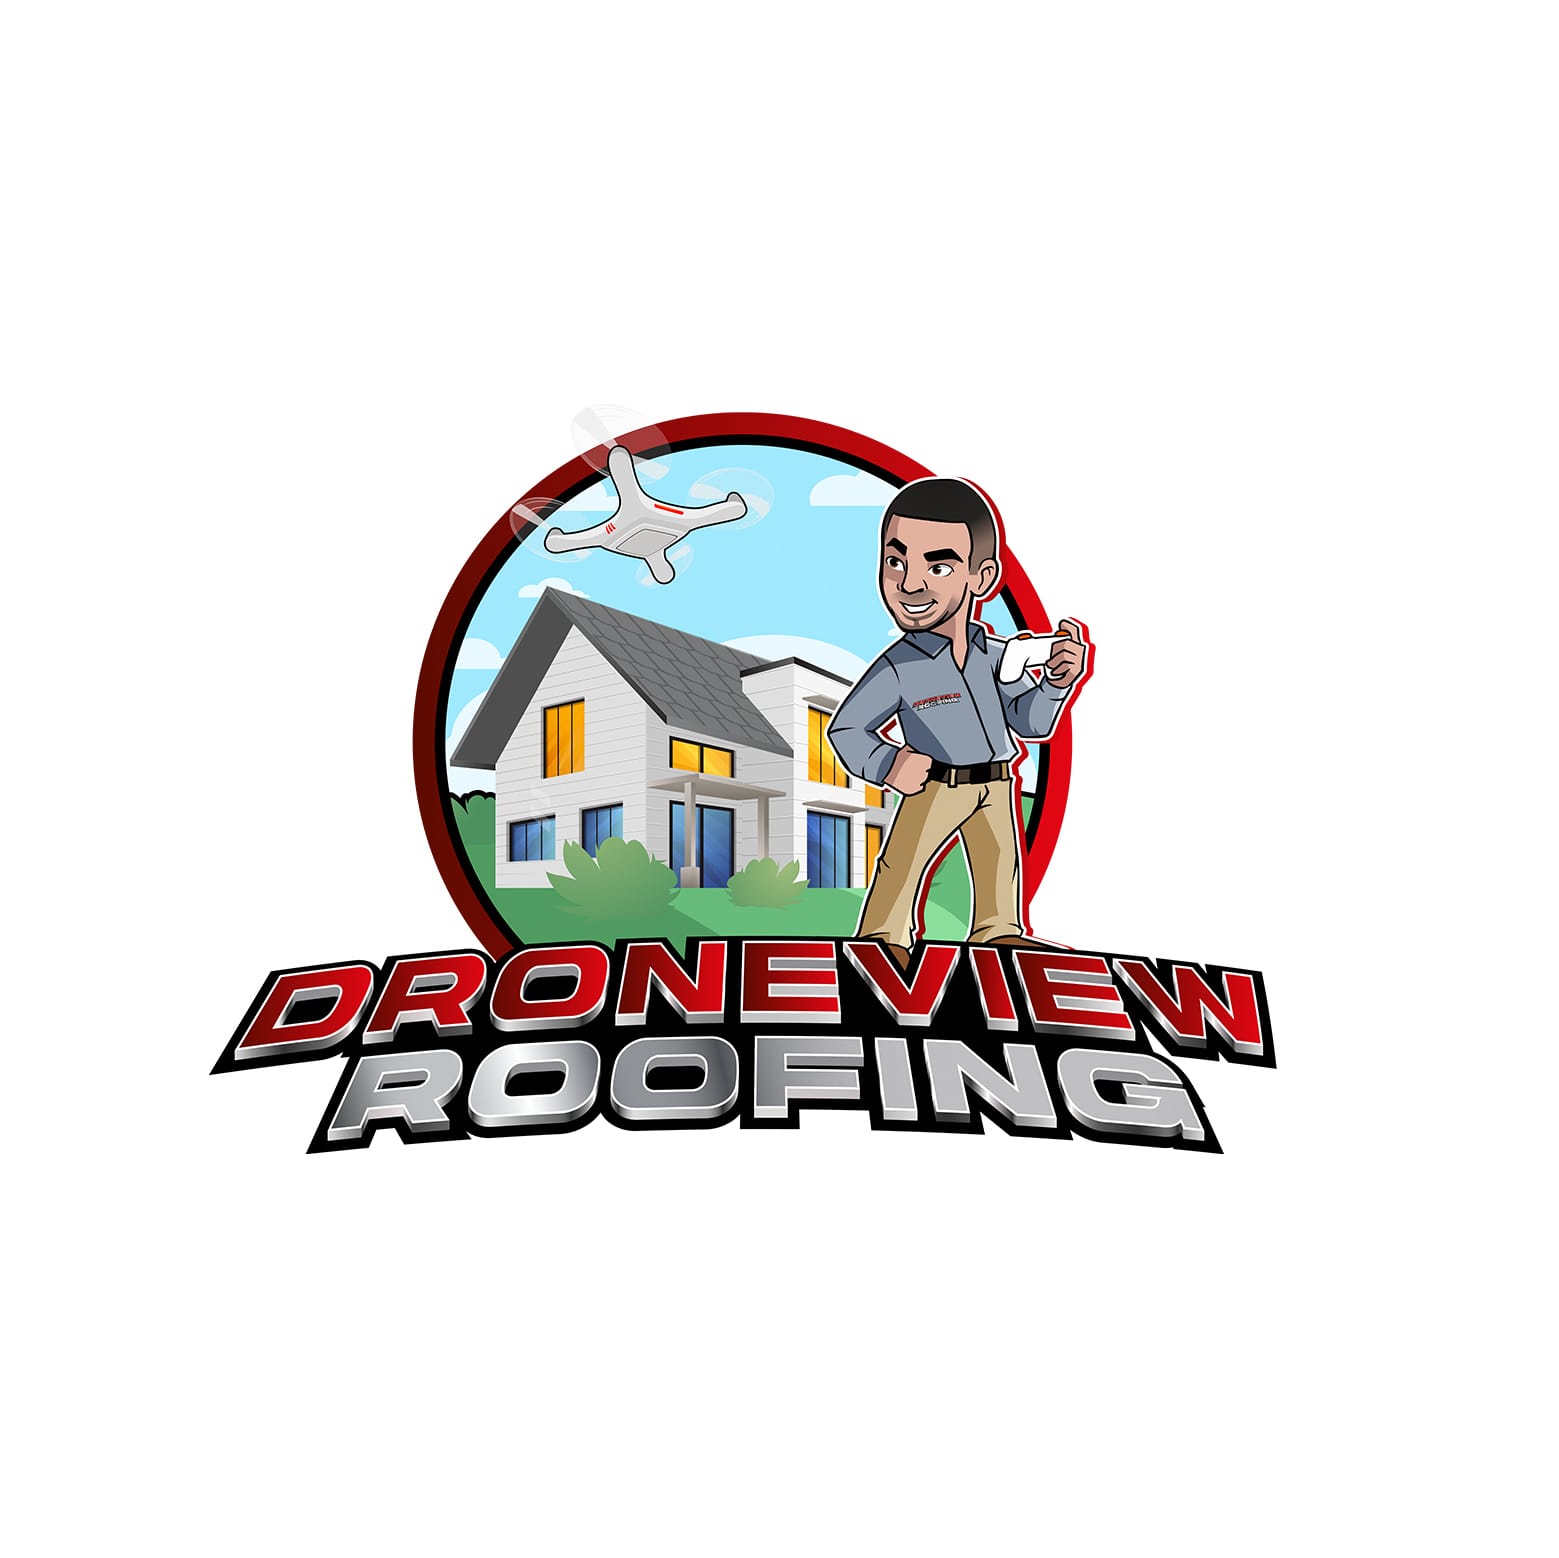 DRONEVIEW ROOFING